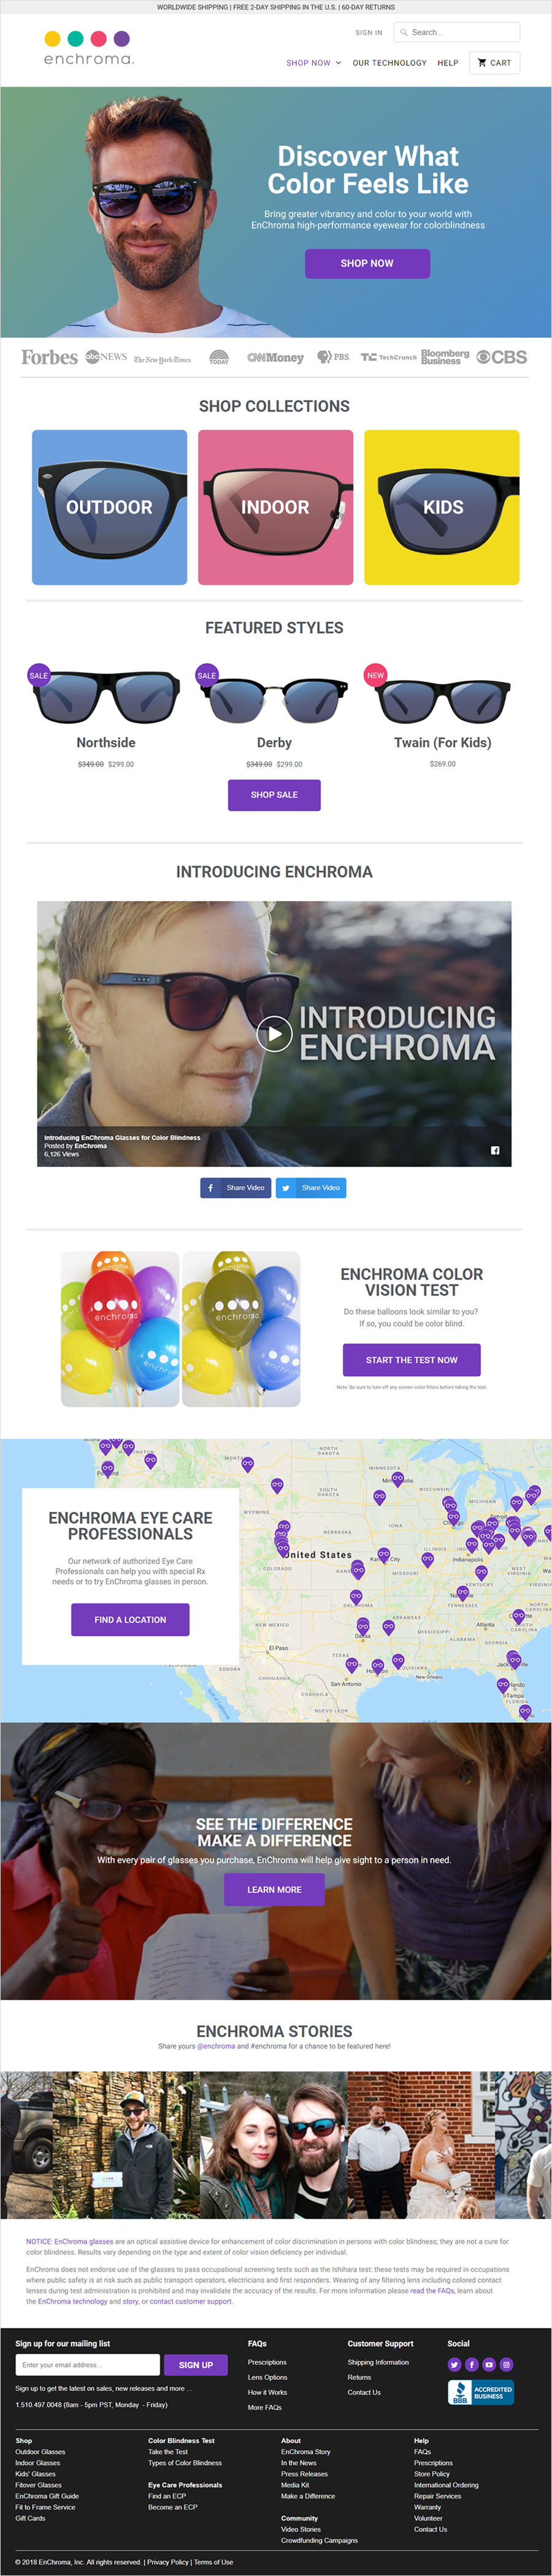 EnChroma Home Page